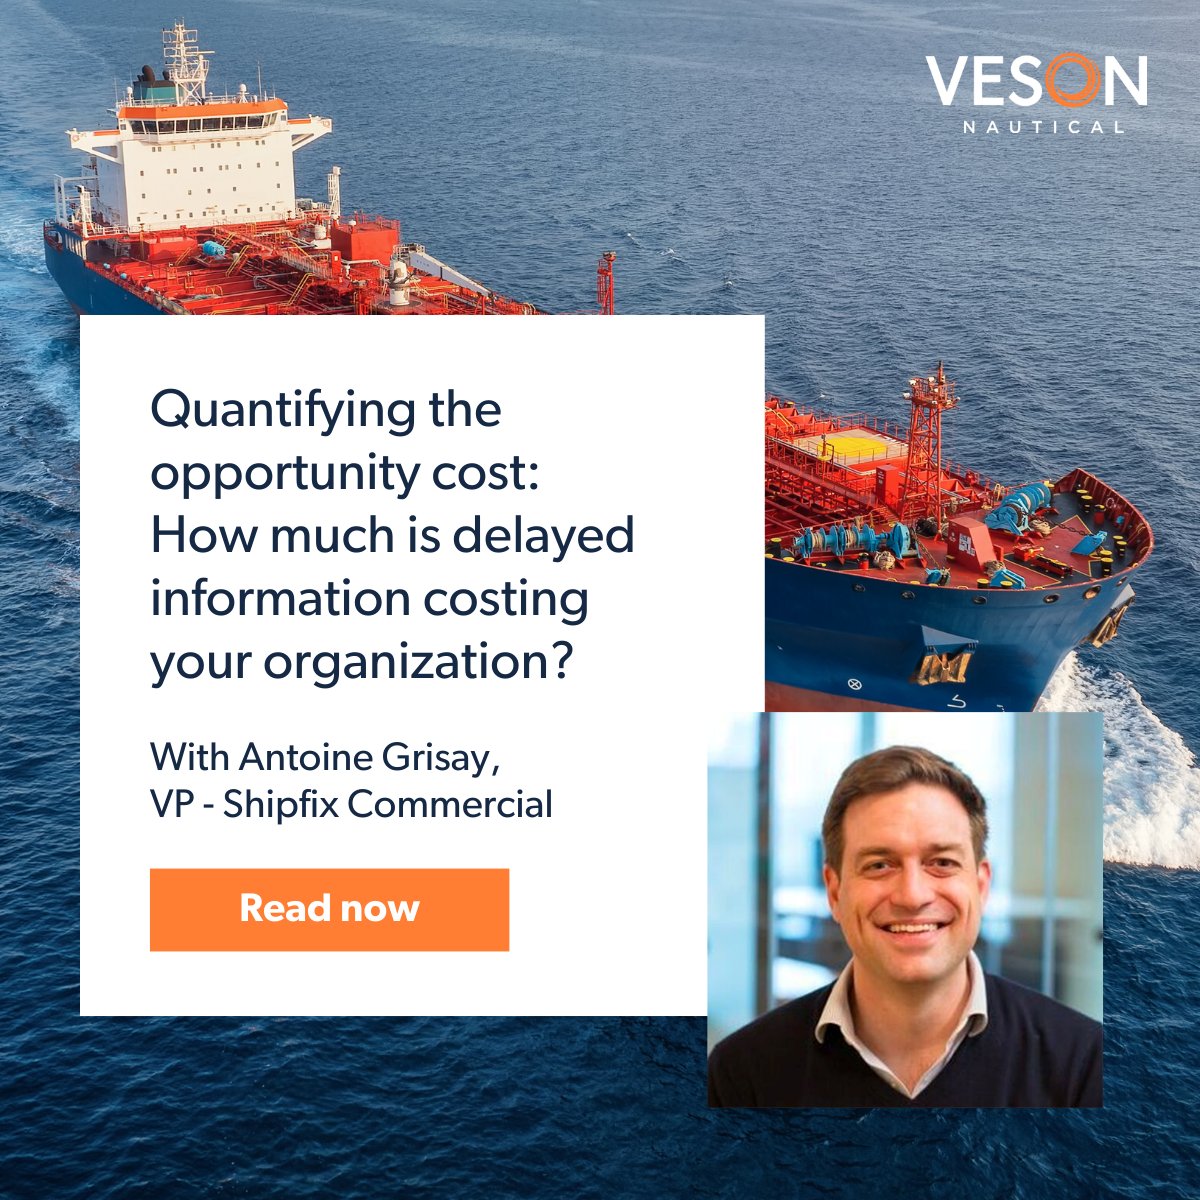 Getting the best cargo and vessel #FreightRates is nearly impossible without #RealTimeData. Antoine Grisay shares the real costs of a missed opportunity for both sides of the #MaritimeContract and how continuous information can make all the difference: hubs.ly/Q02t24jW0